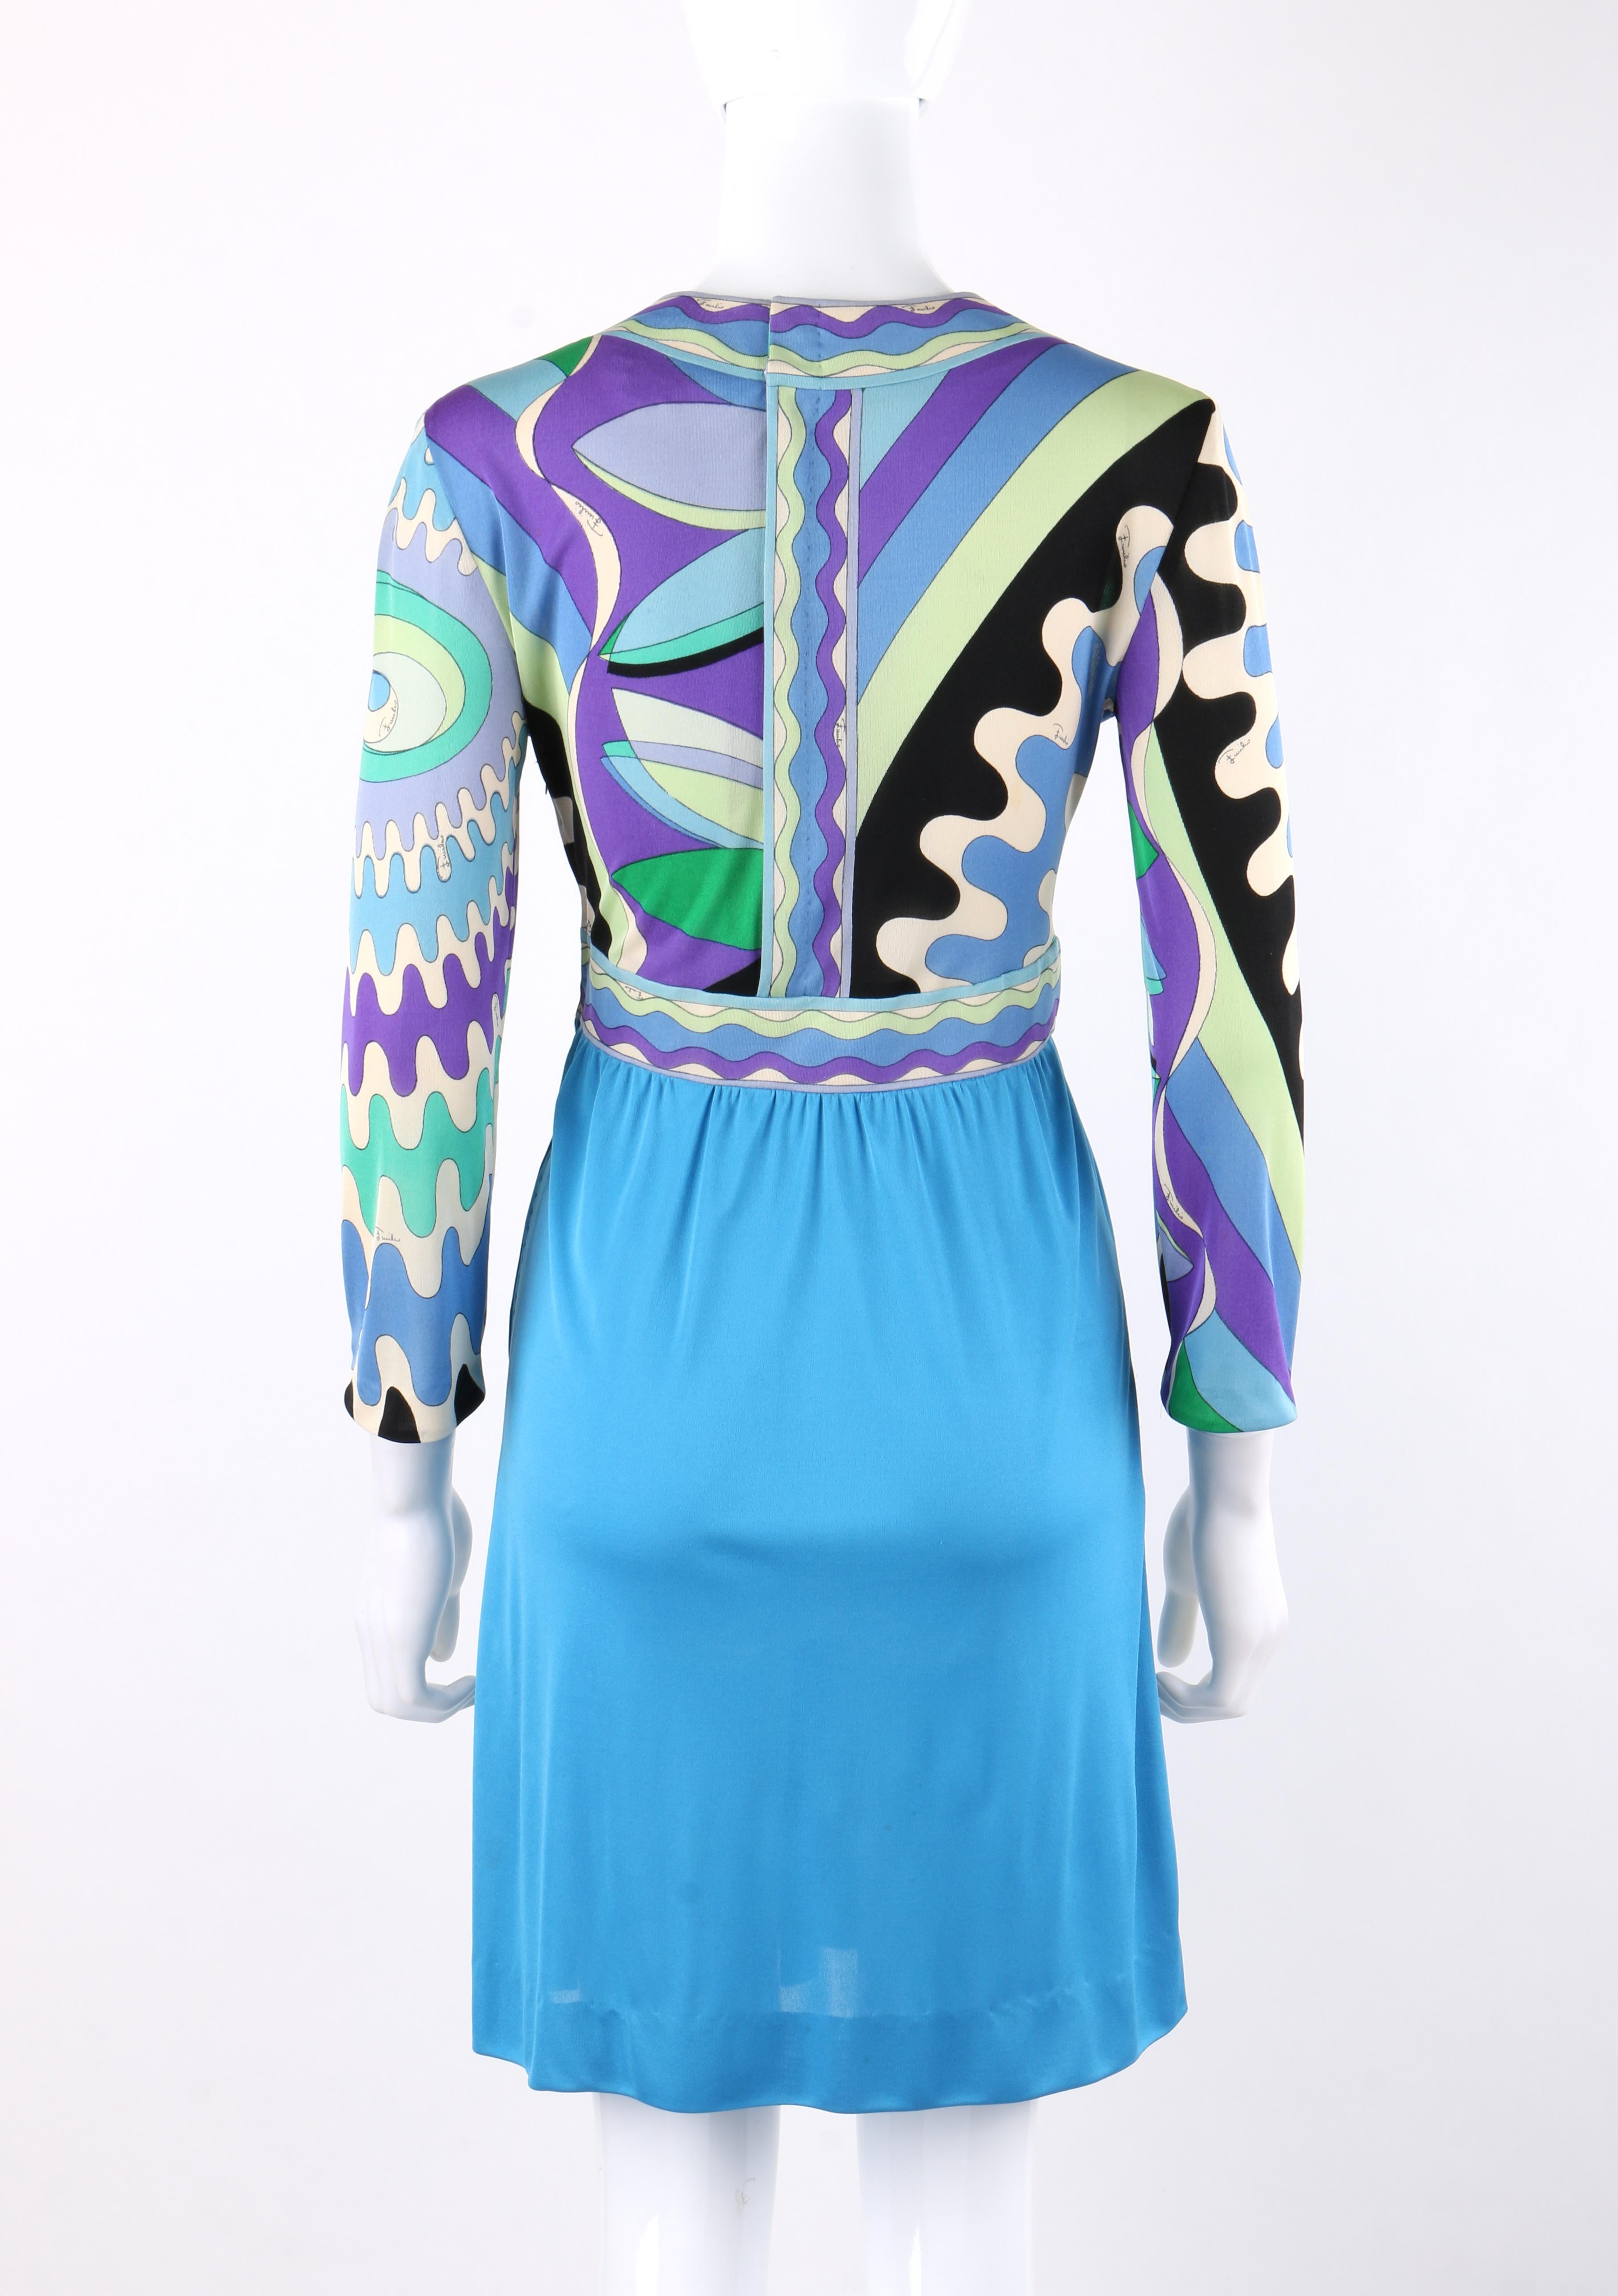 emilio pucci dress in floral and abstract geometric printed silk jersey